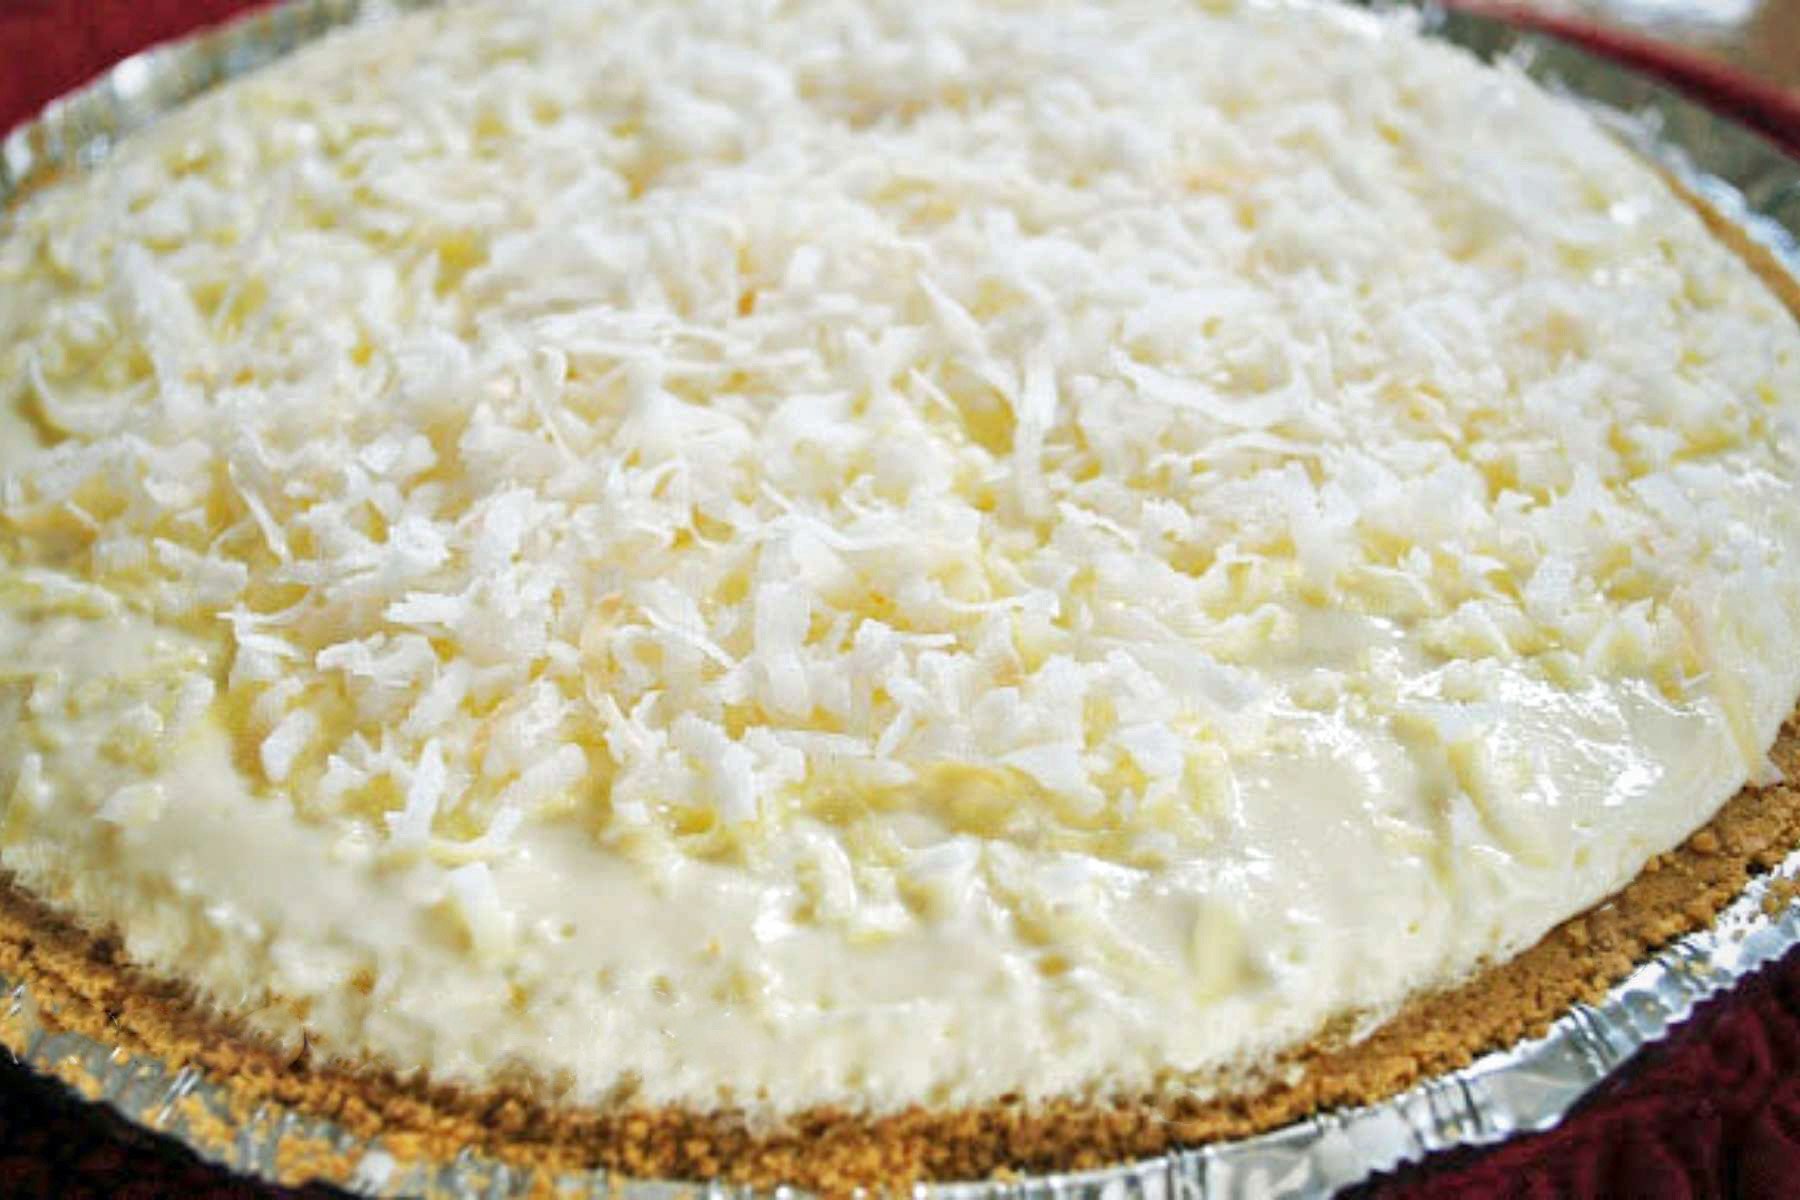 A whole coconut pie on a table